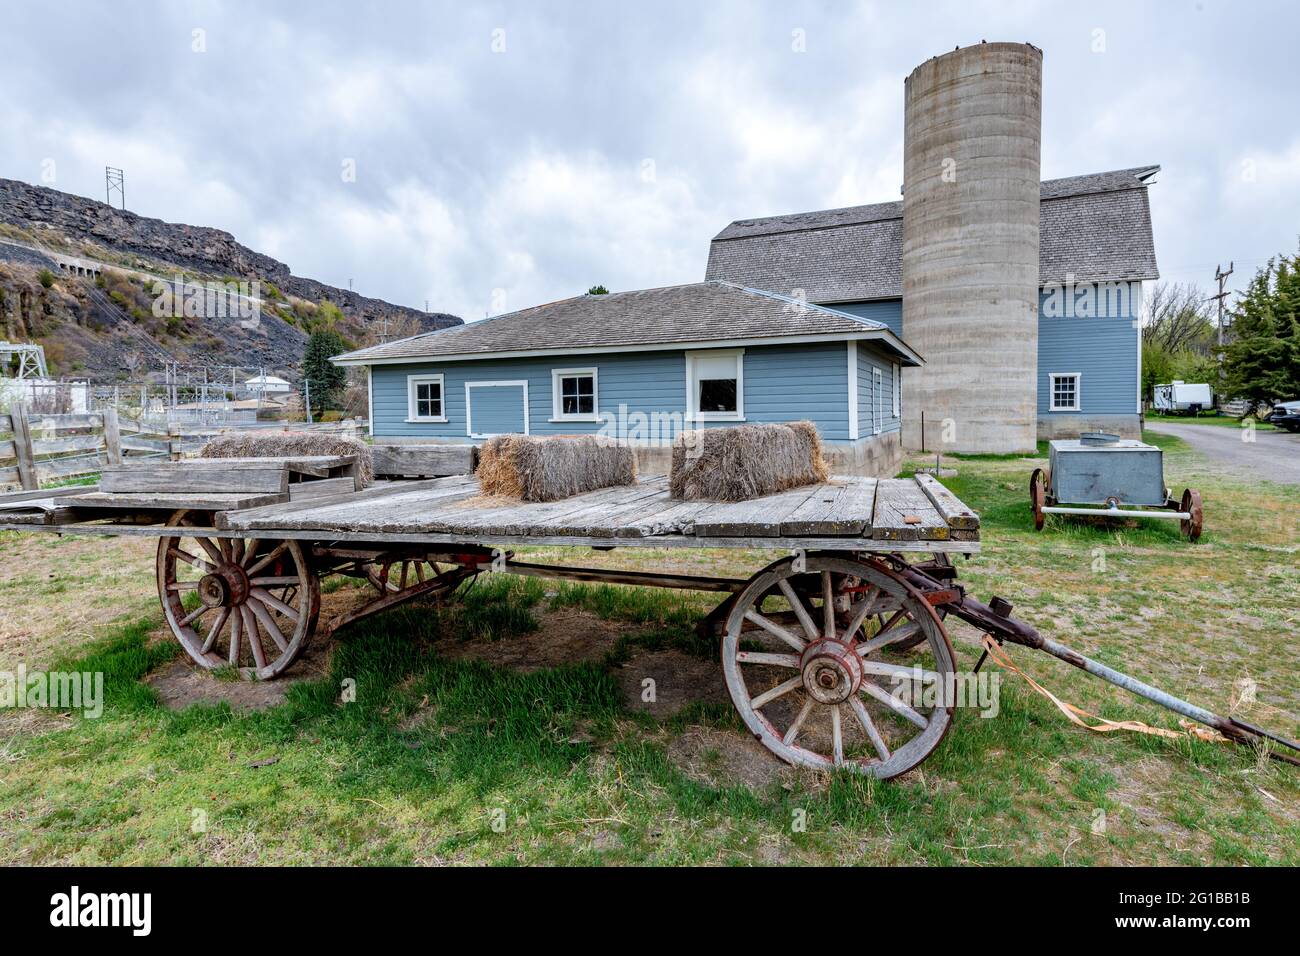 Rustic farm in Idaho with an old wooden wagon cart Stock Photo